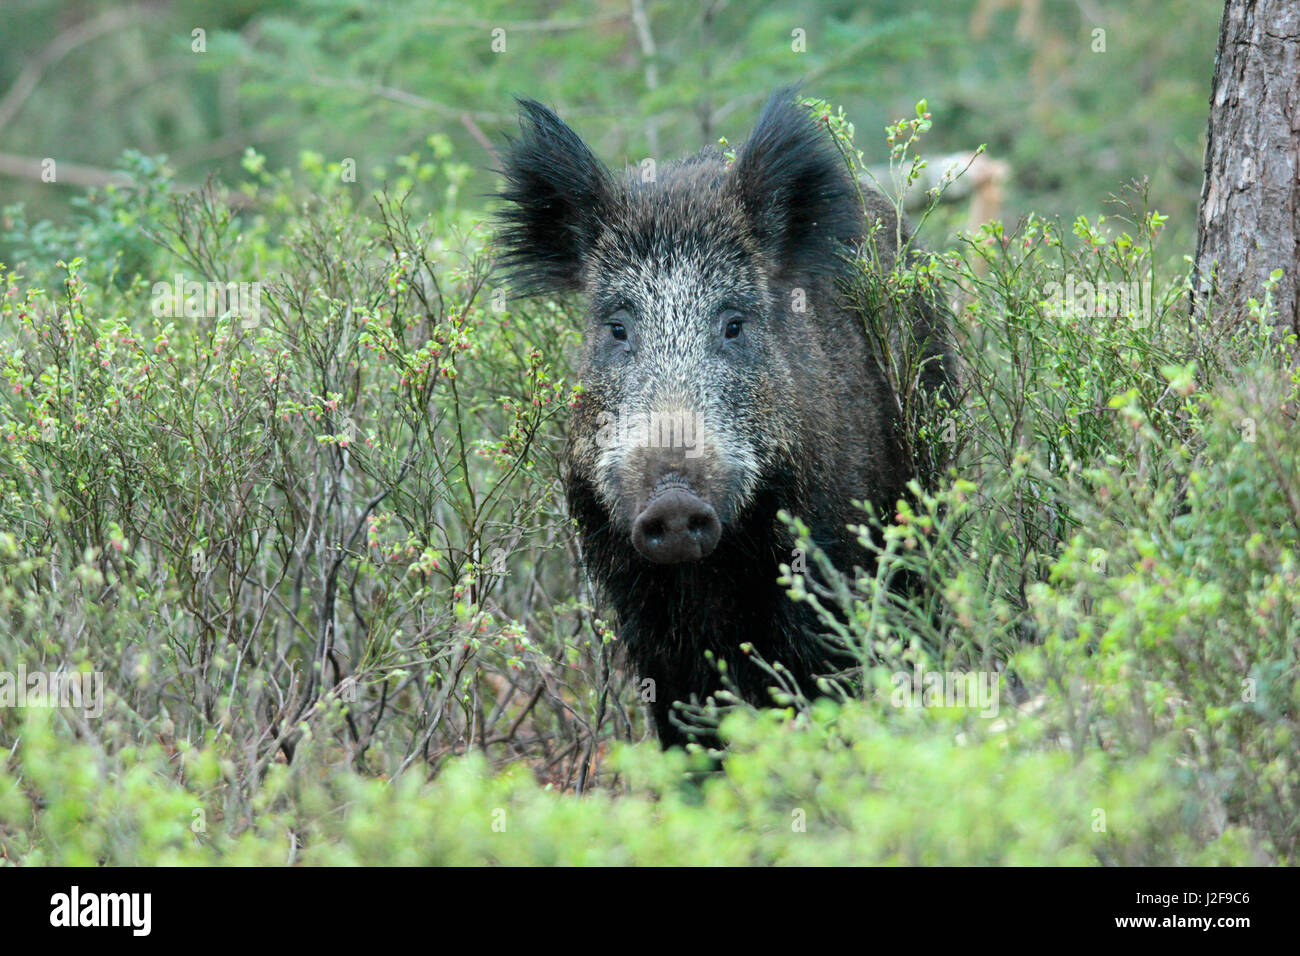 Wild boar between billberries in a forest, in a natural surrounding Stock Photo